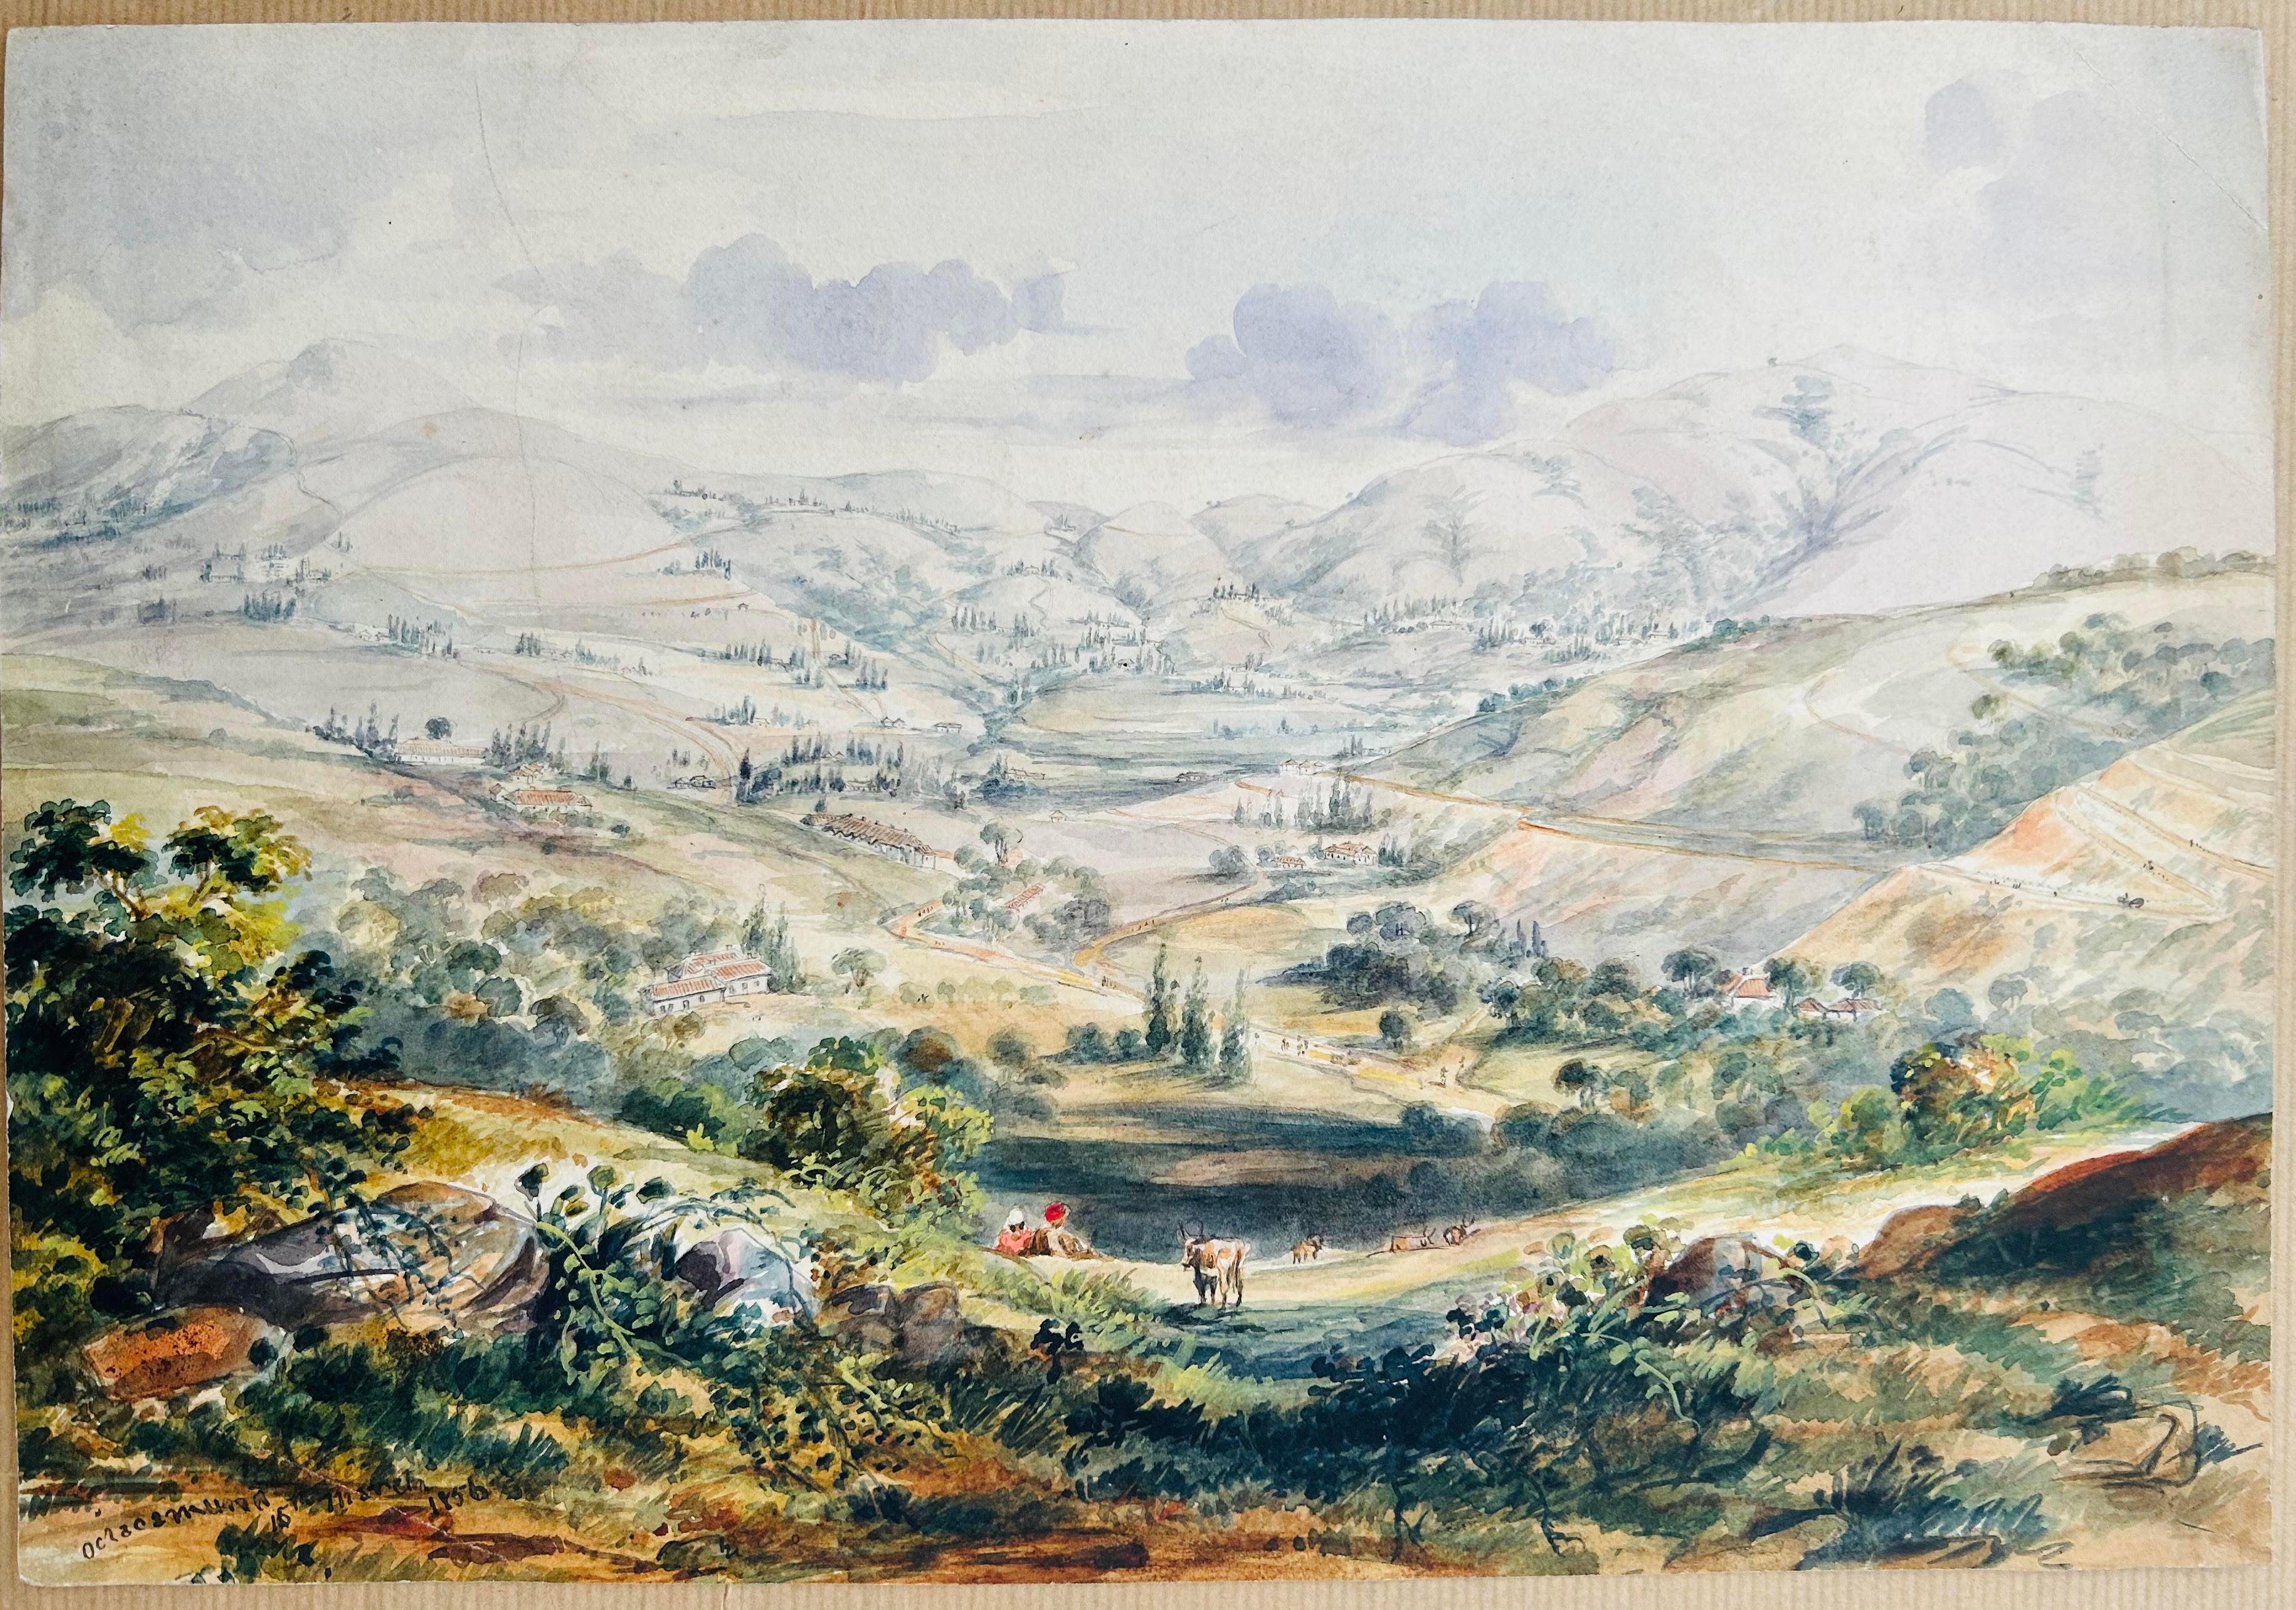 
Artist: Unknown
Medium: Watercolour on Paper
Created: 1856
Size: 22.2 x 32.5 cm 
Signed bottom left in pencil Ootacamund 10th March 1856

Written on back in pencil 'Ootacamund from above the Elk Hill, March/56'

This is an exquisitely executed